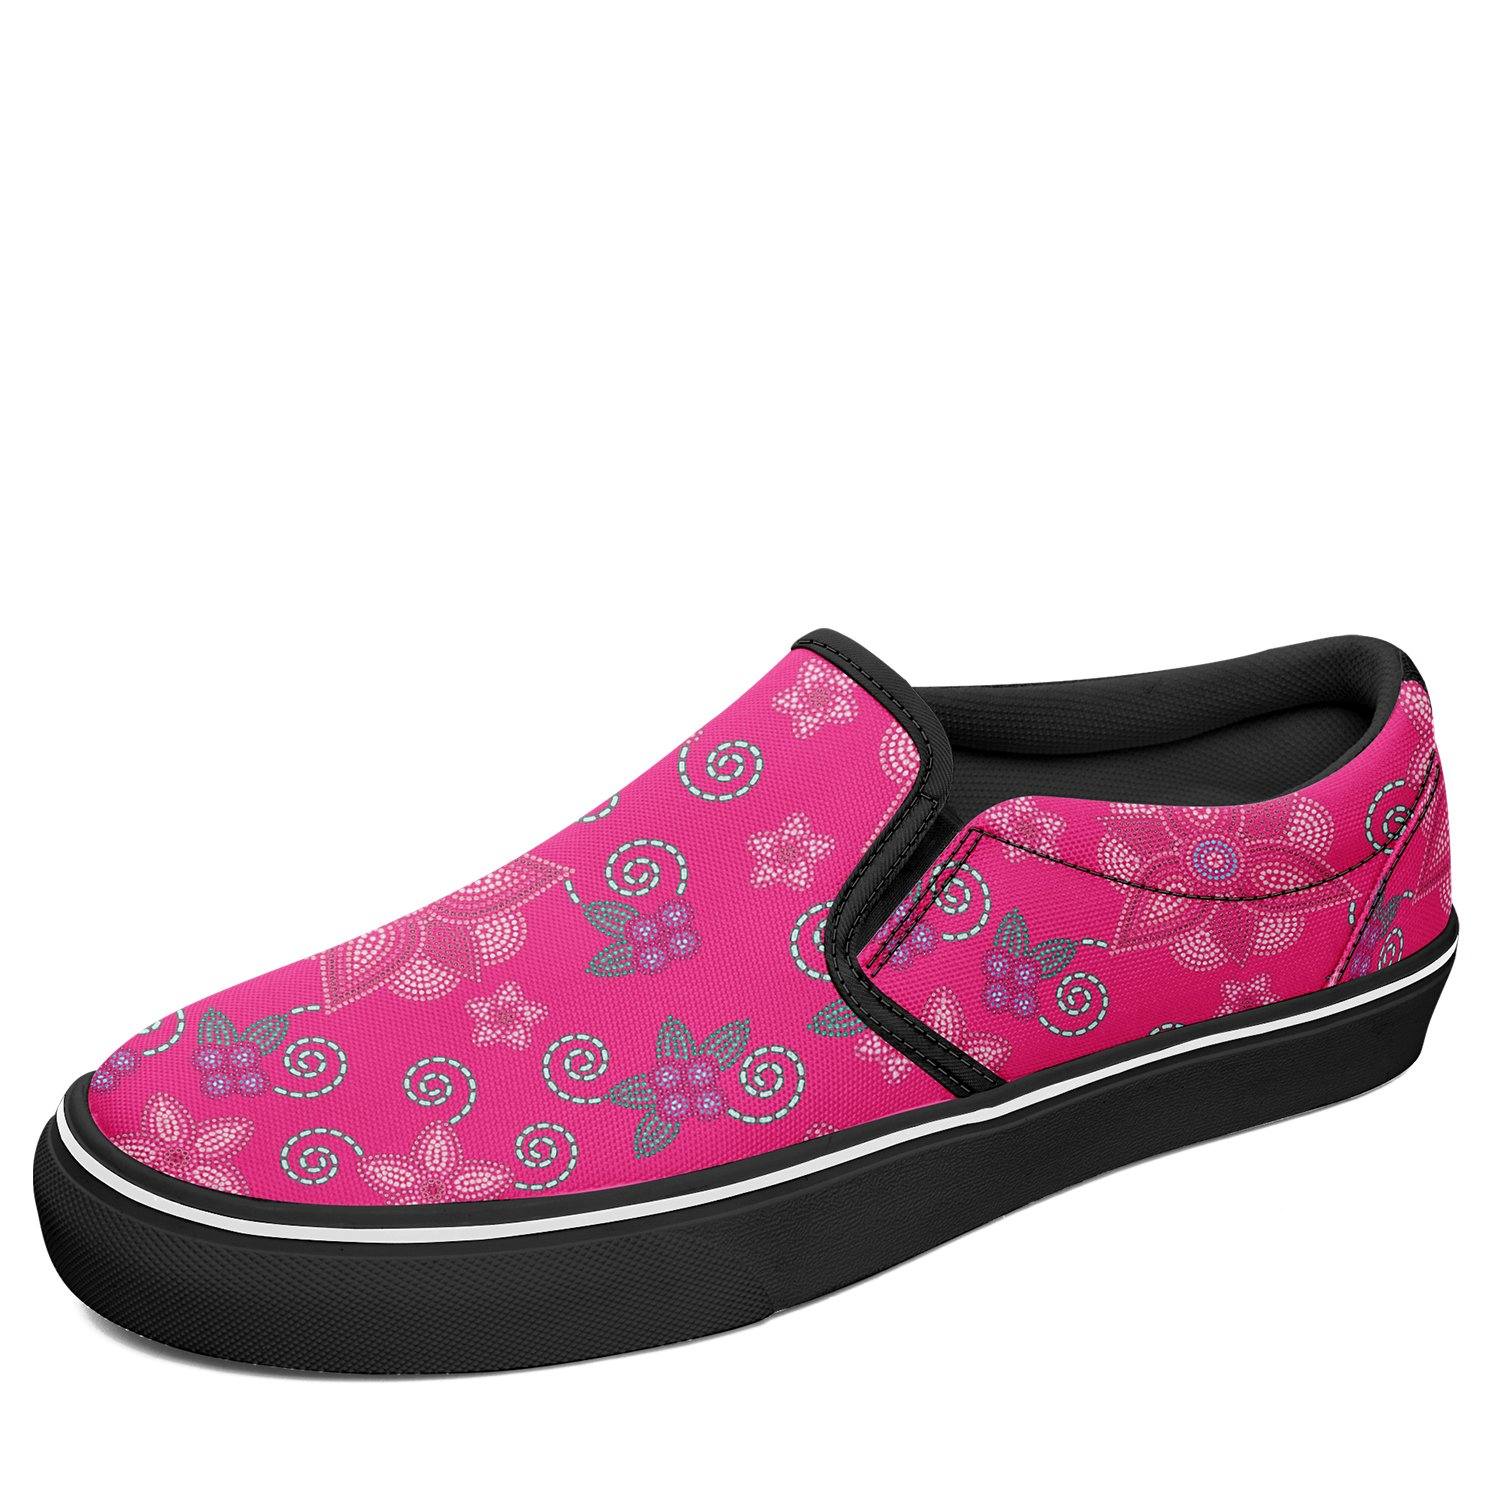 Otoyimm Kids Canvas Slip On Shoes